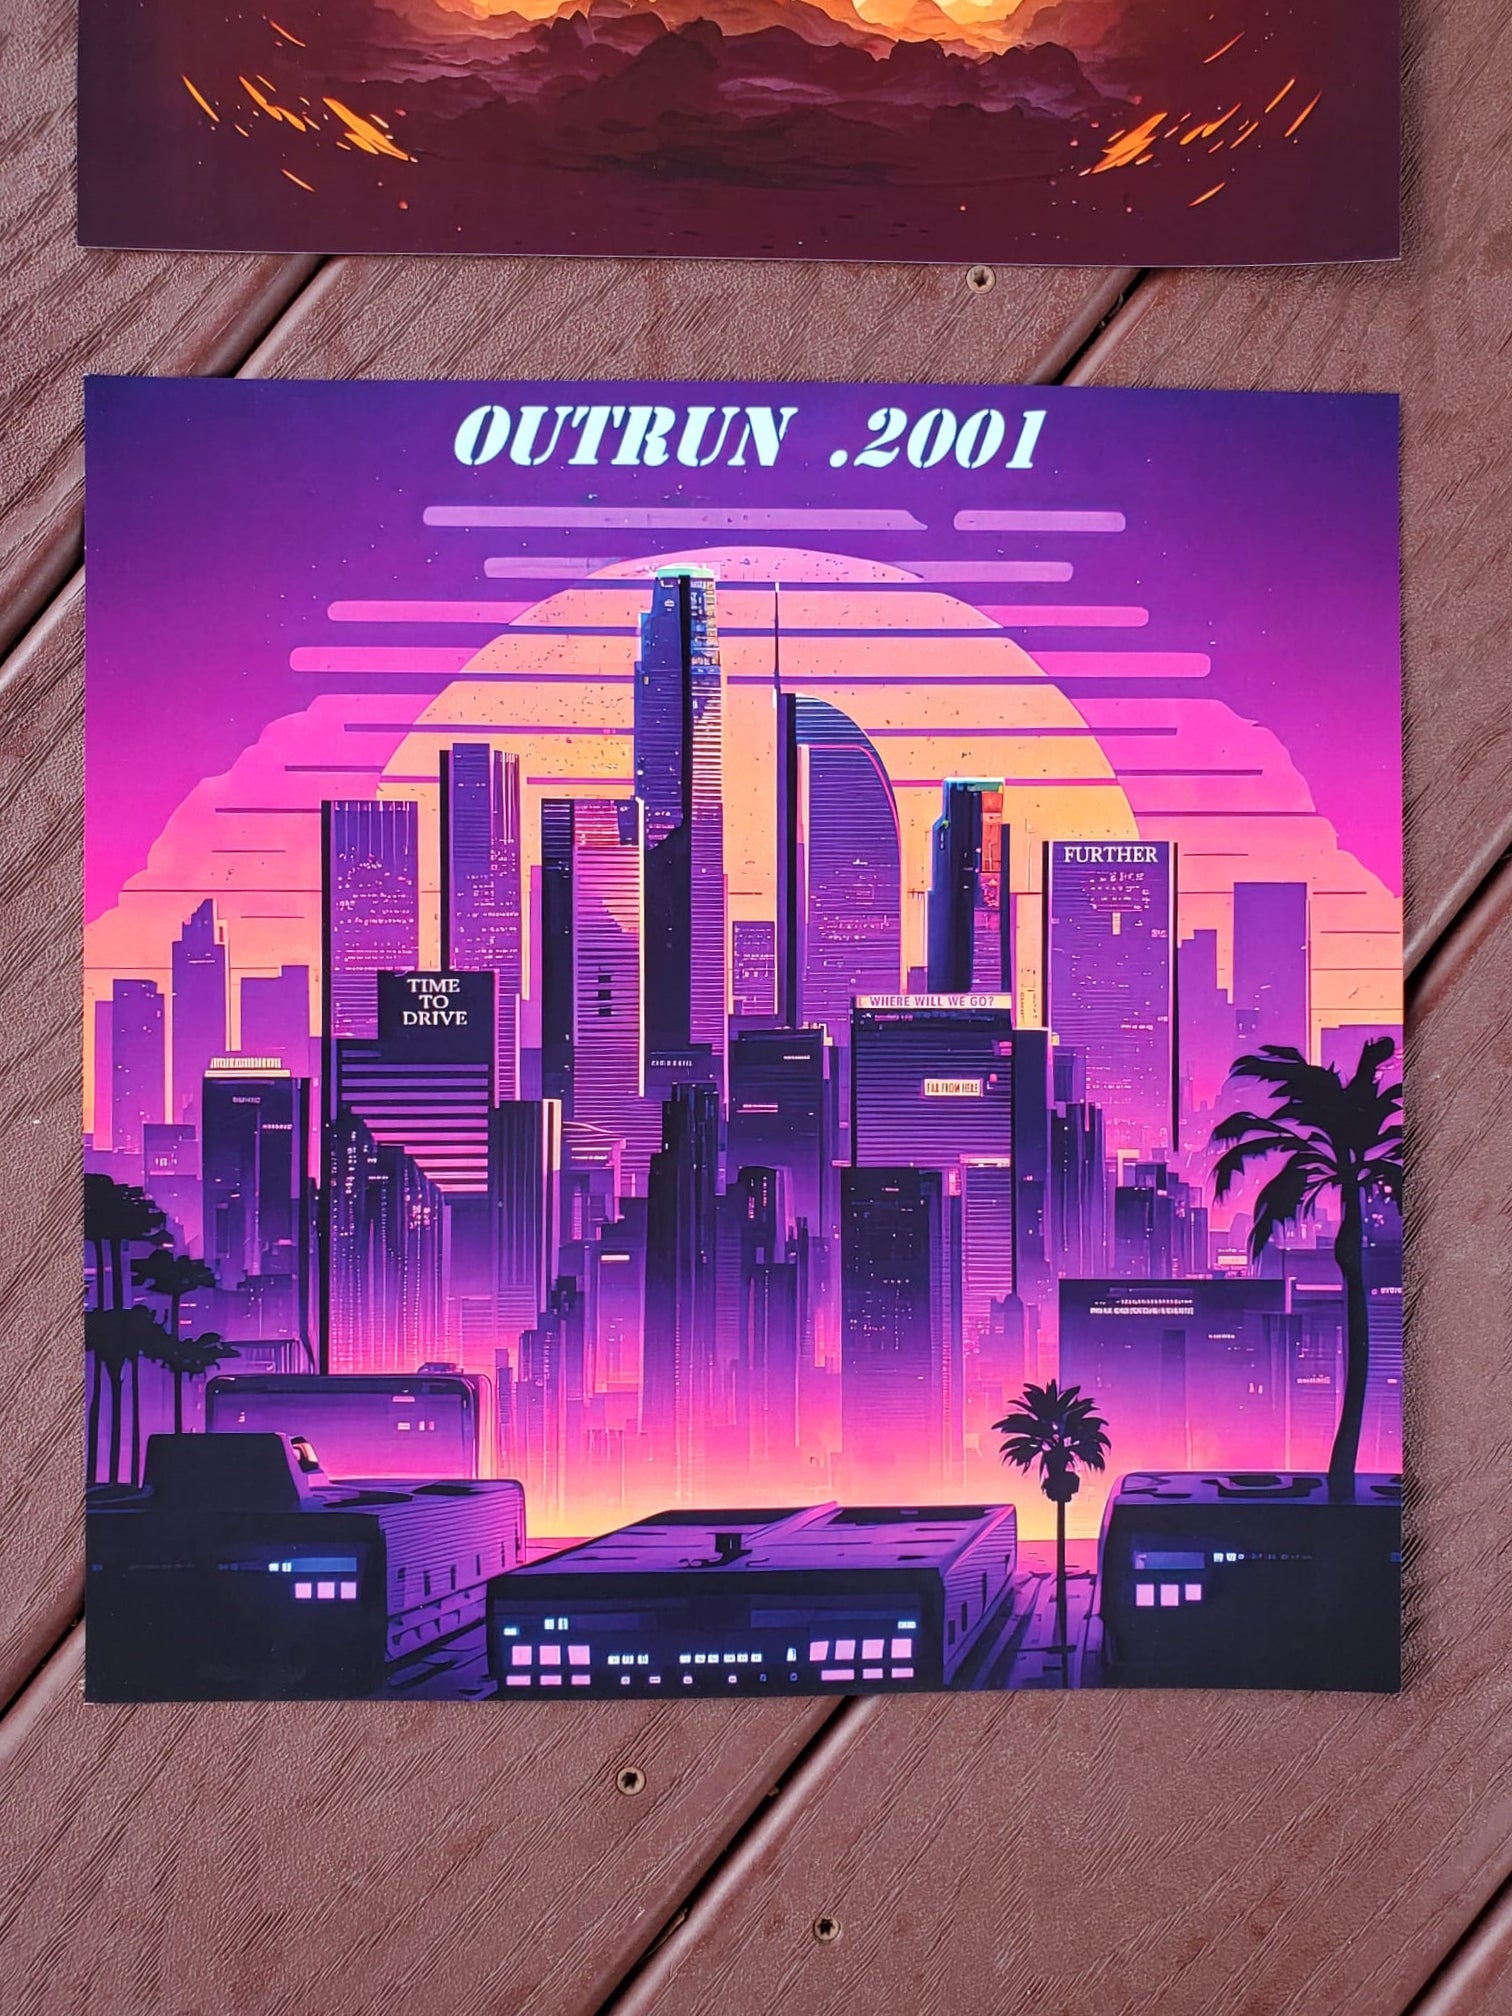 los tokyo - synthwave cyberpunk los angeles city skyline (ig@outrun.2001)